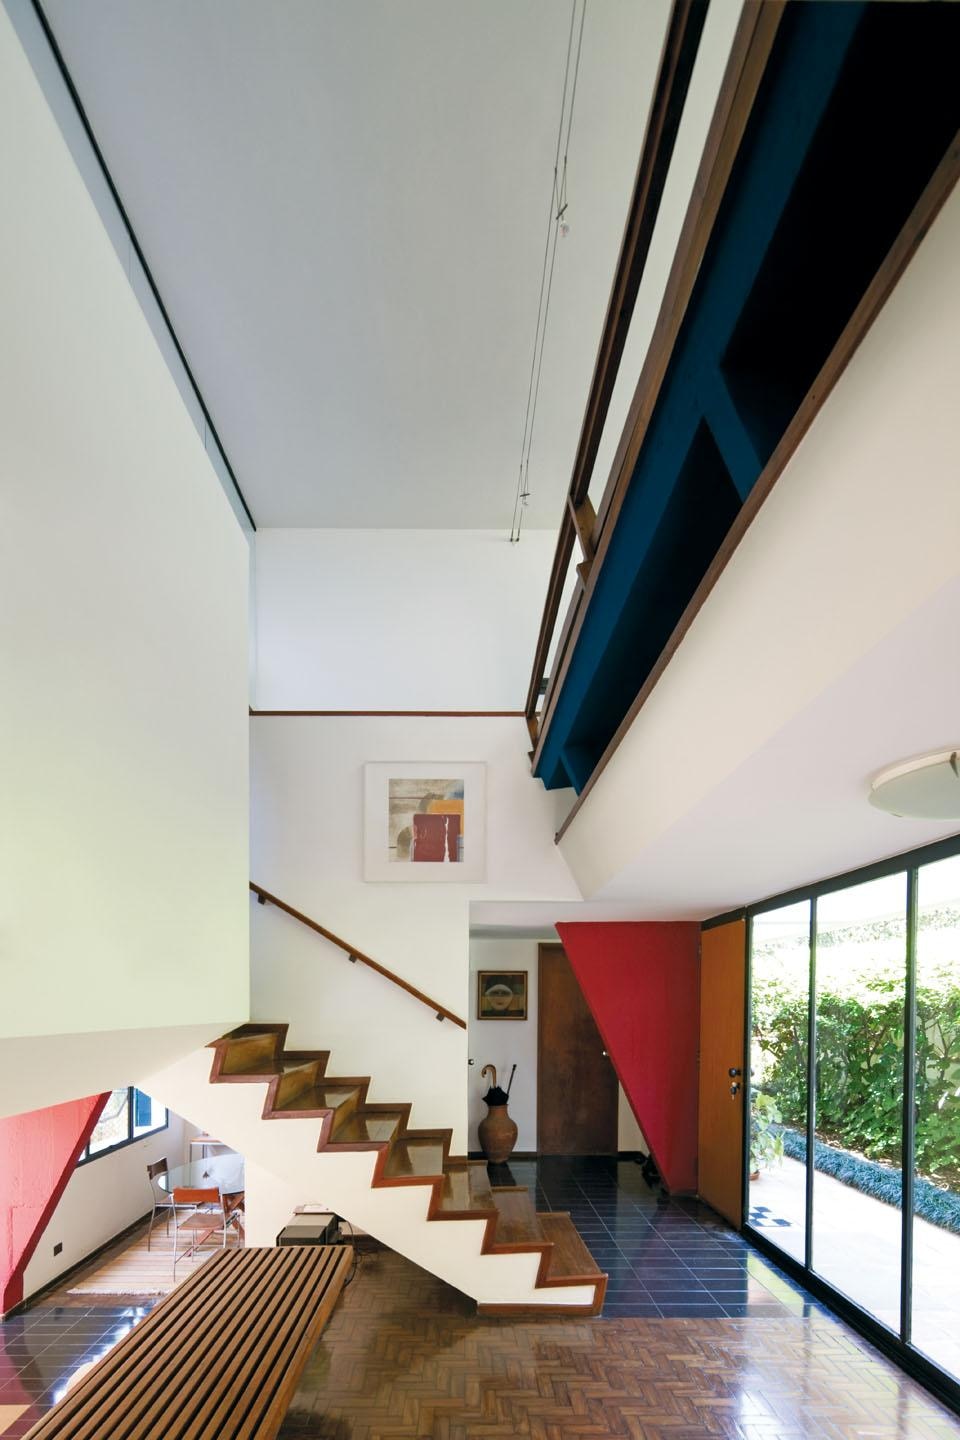 The two-storey Rubens
de Mendonça House has an interior
double-height space facing the hallway,
which leads to the bedrooms